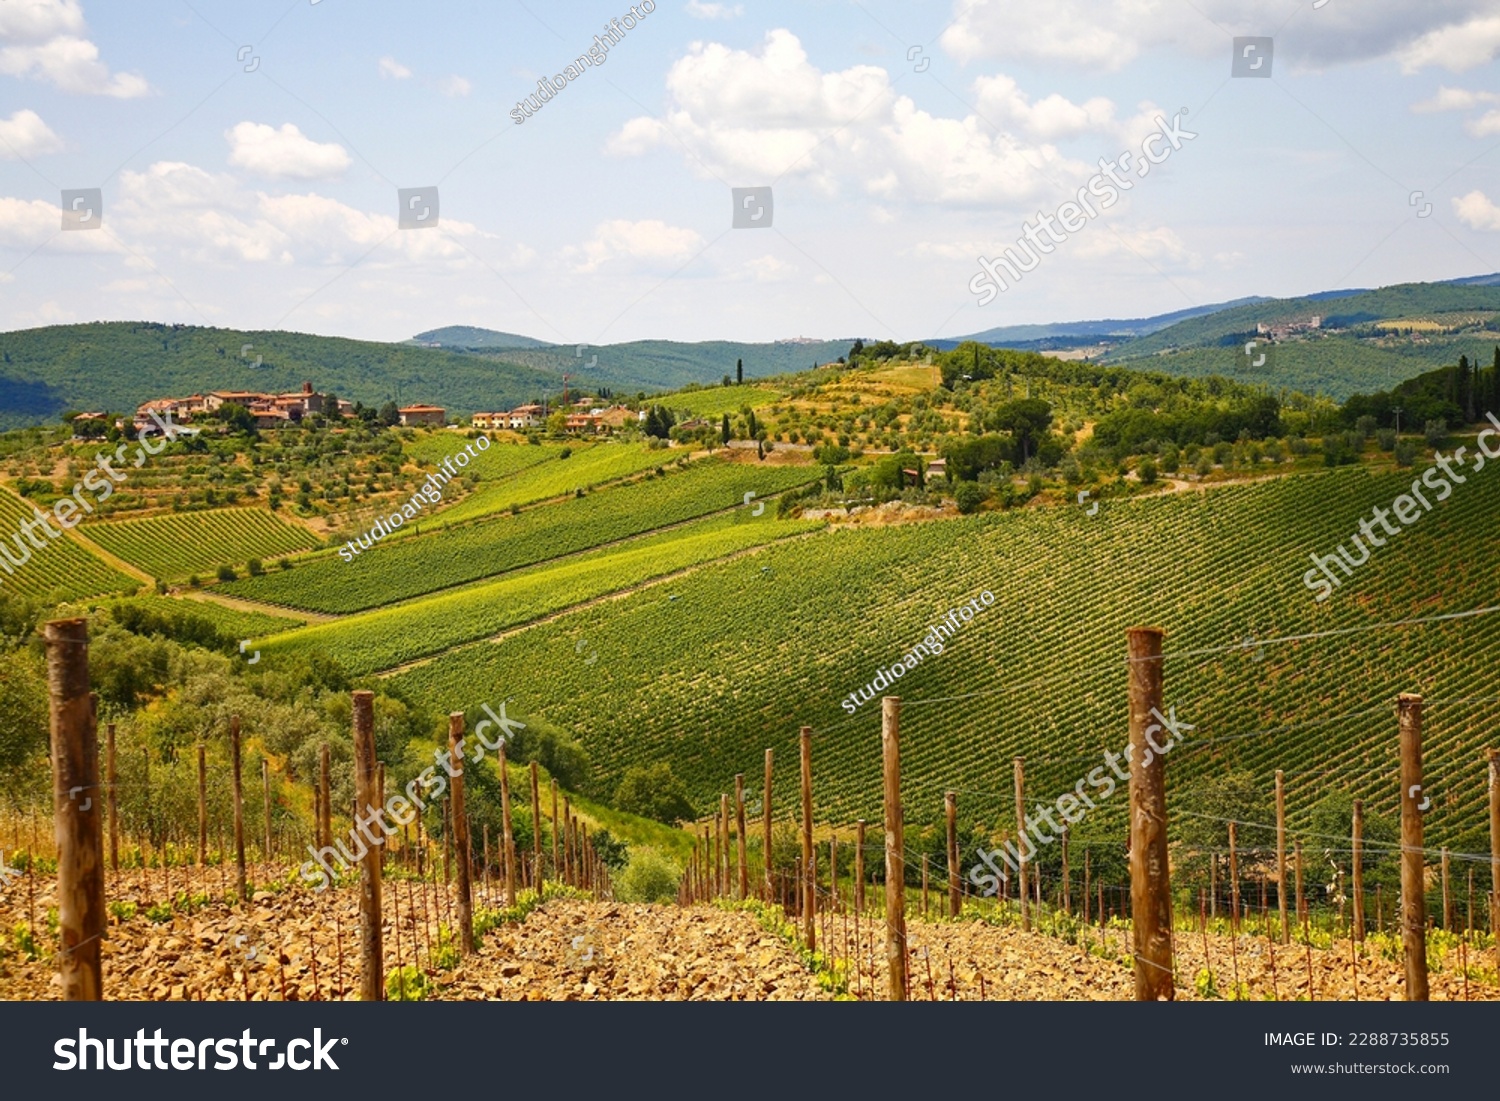 Wine factories of Chianti.Characteristic of this part of Tuscany is the fascinating succession of villages, vineyards and hills. Tuscany, Italy #2288735855